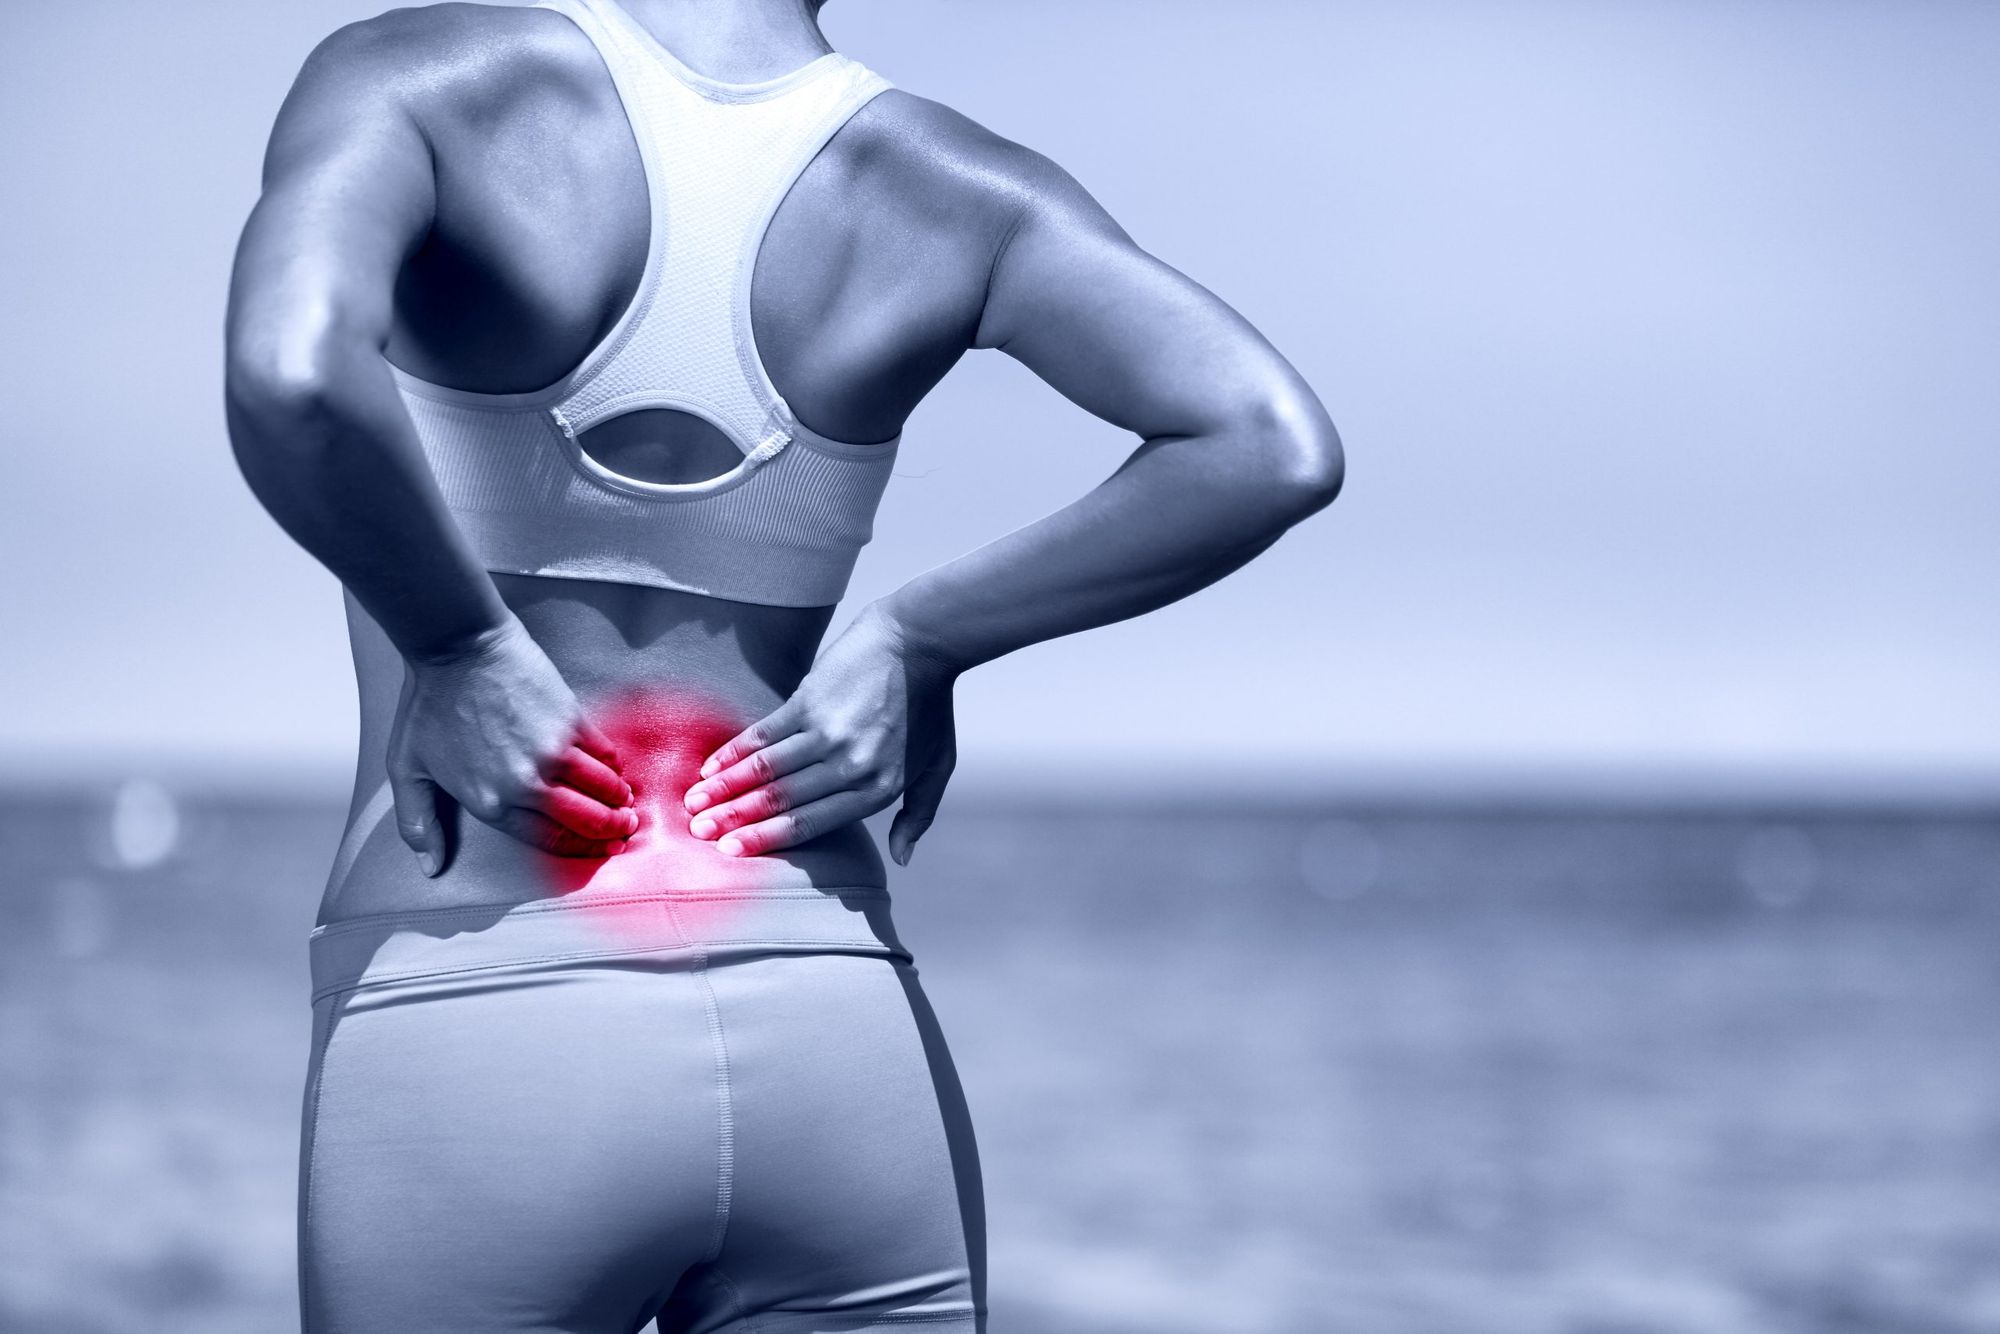 Exercising with Lower Back Pain: Should You Work Through the Pain?